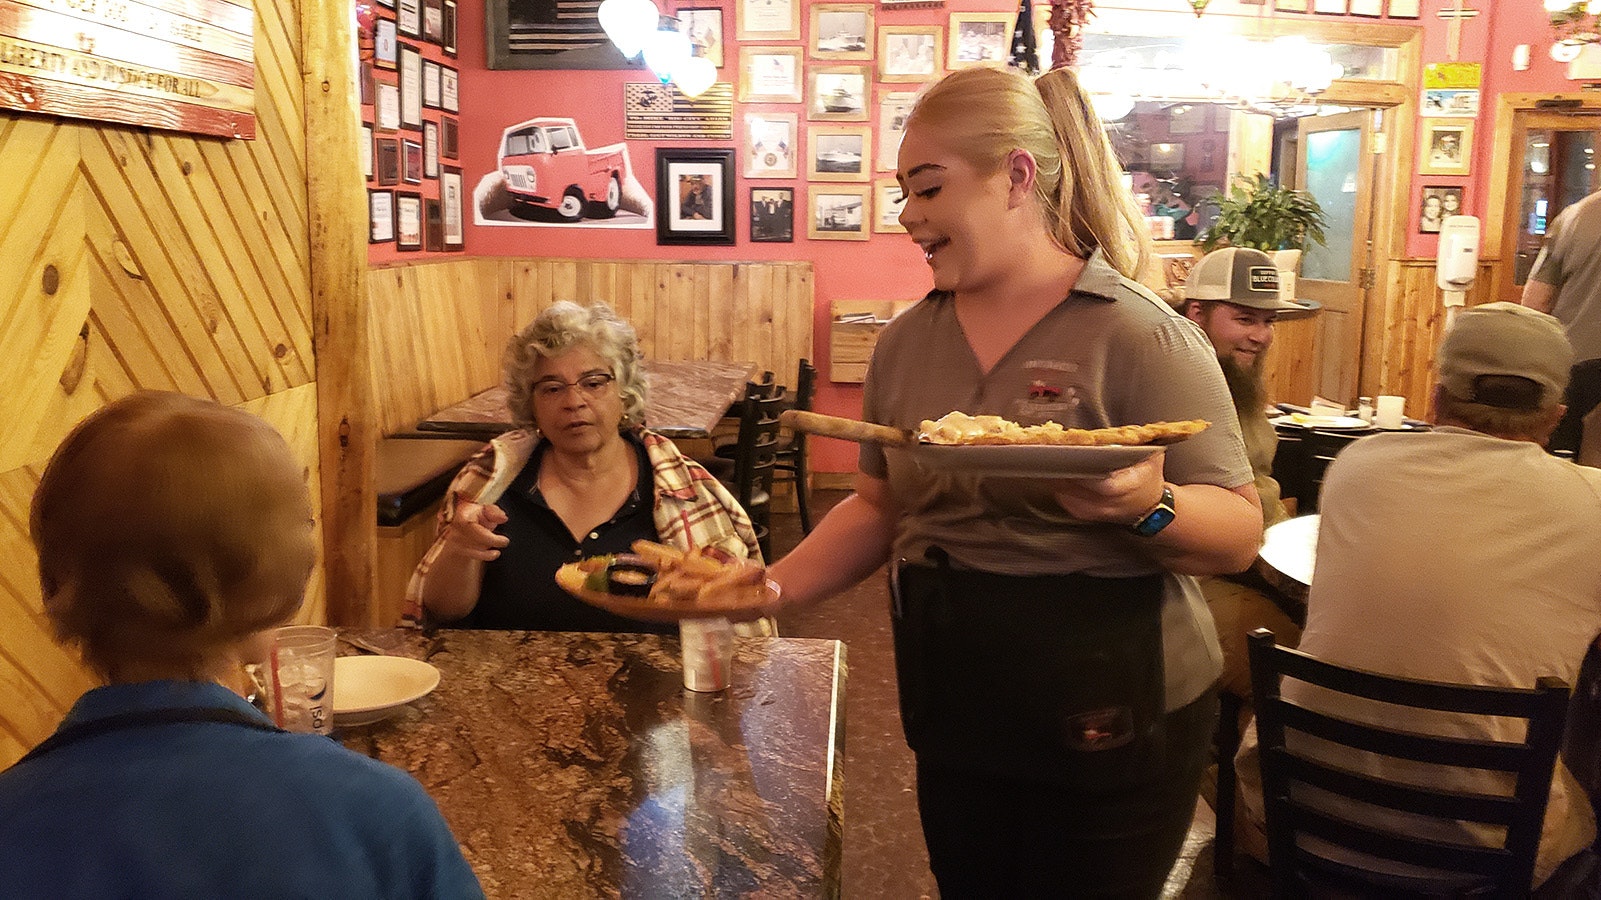 Service always comes with a smile at Michael's Big City Steakhouse.